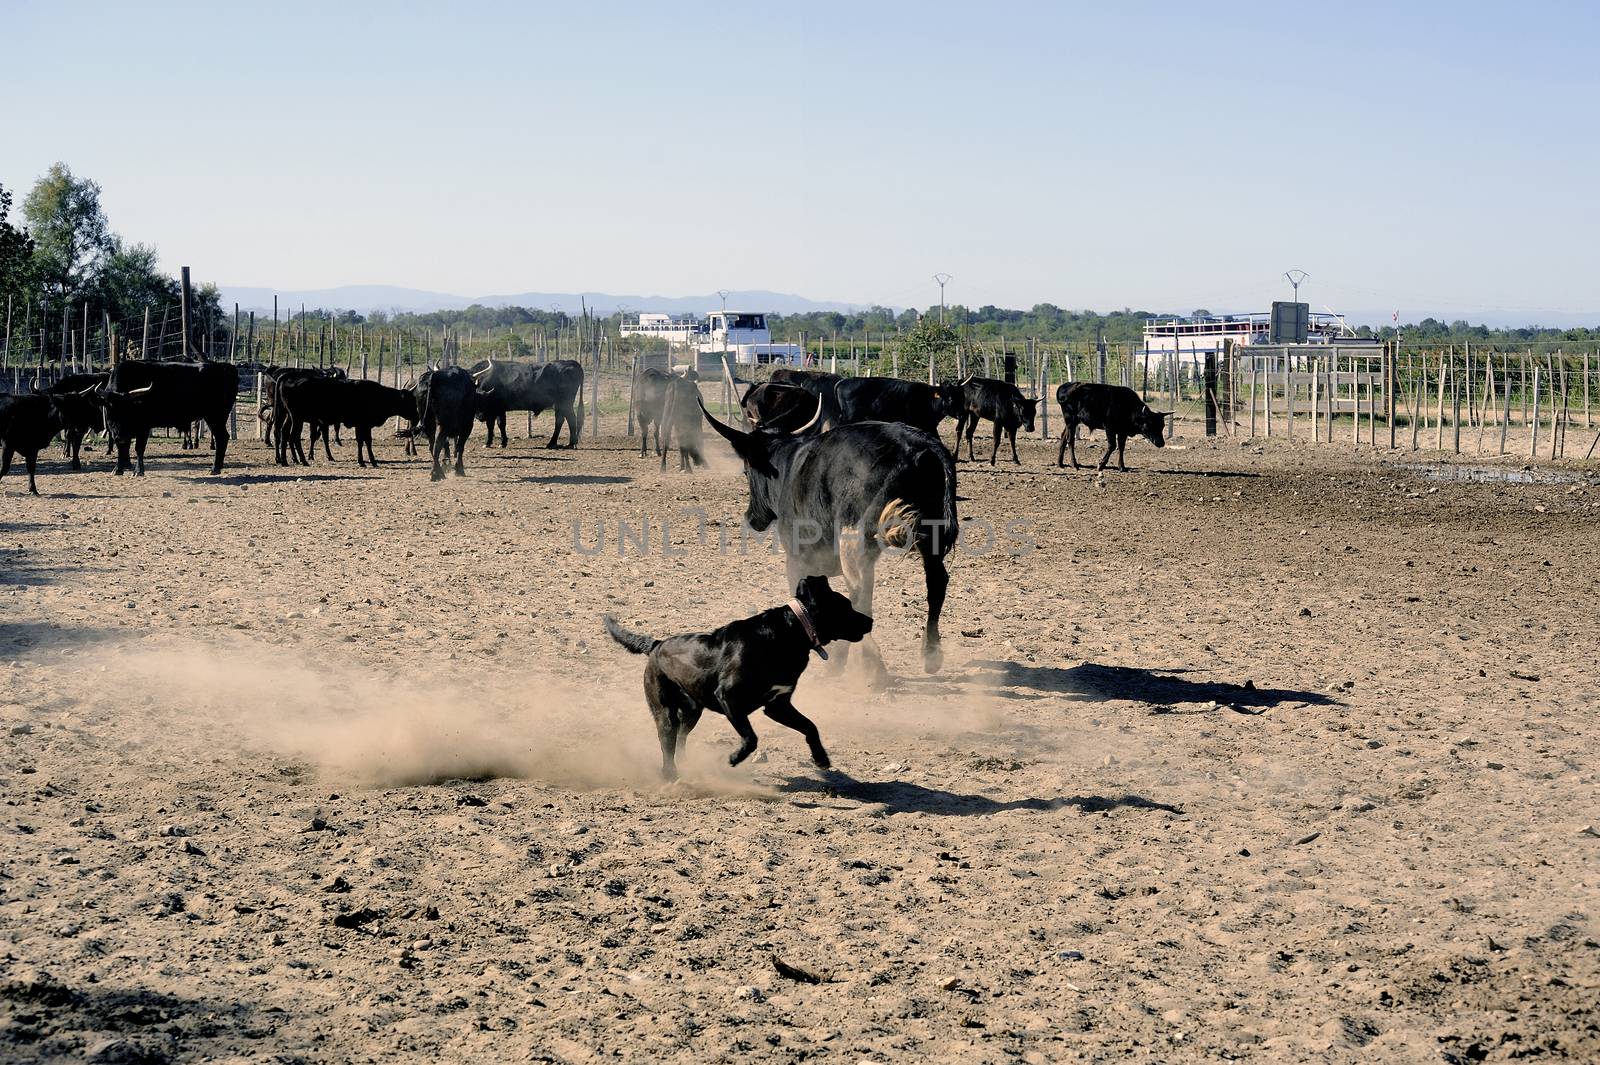 the herdsman bull dog at work in the French Camargue region